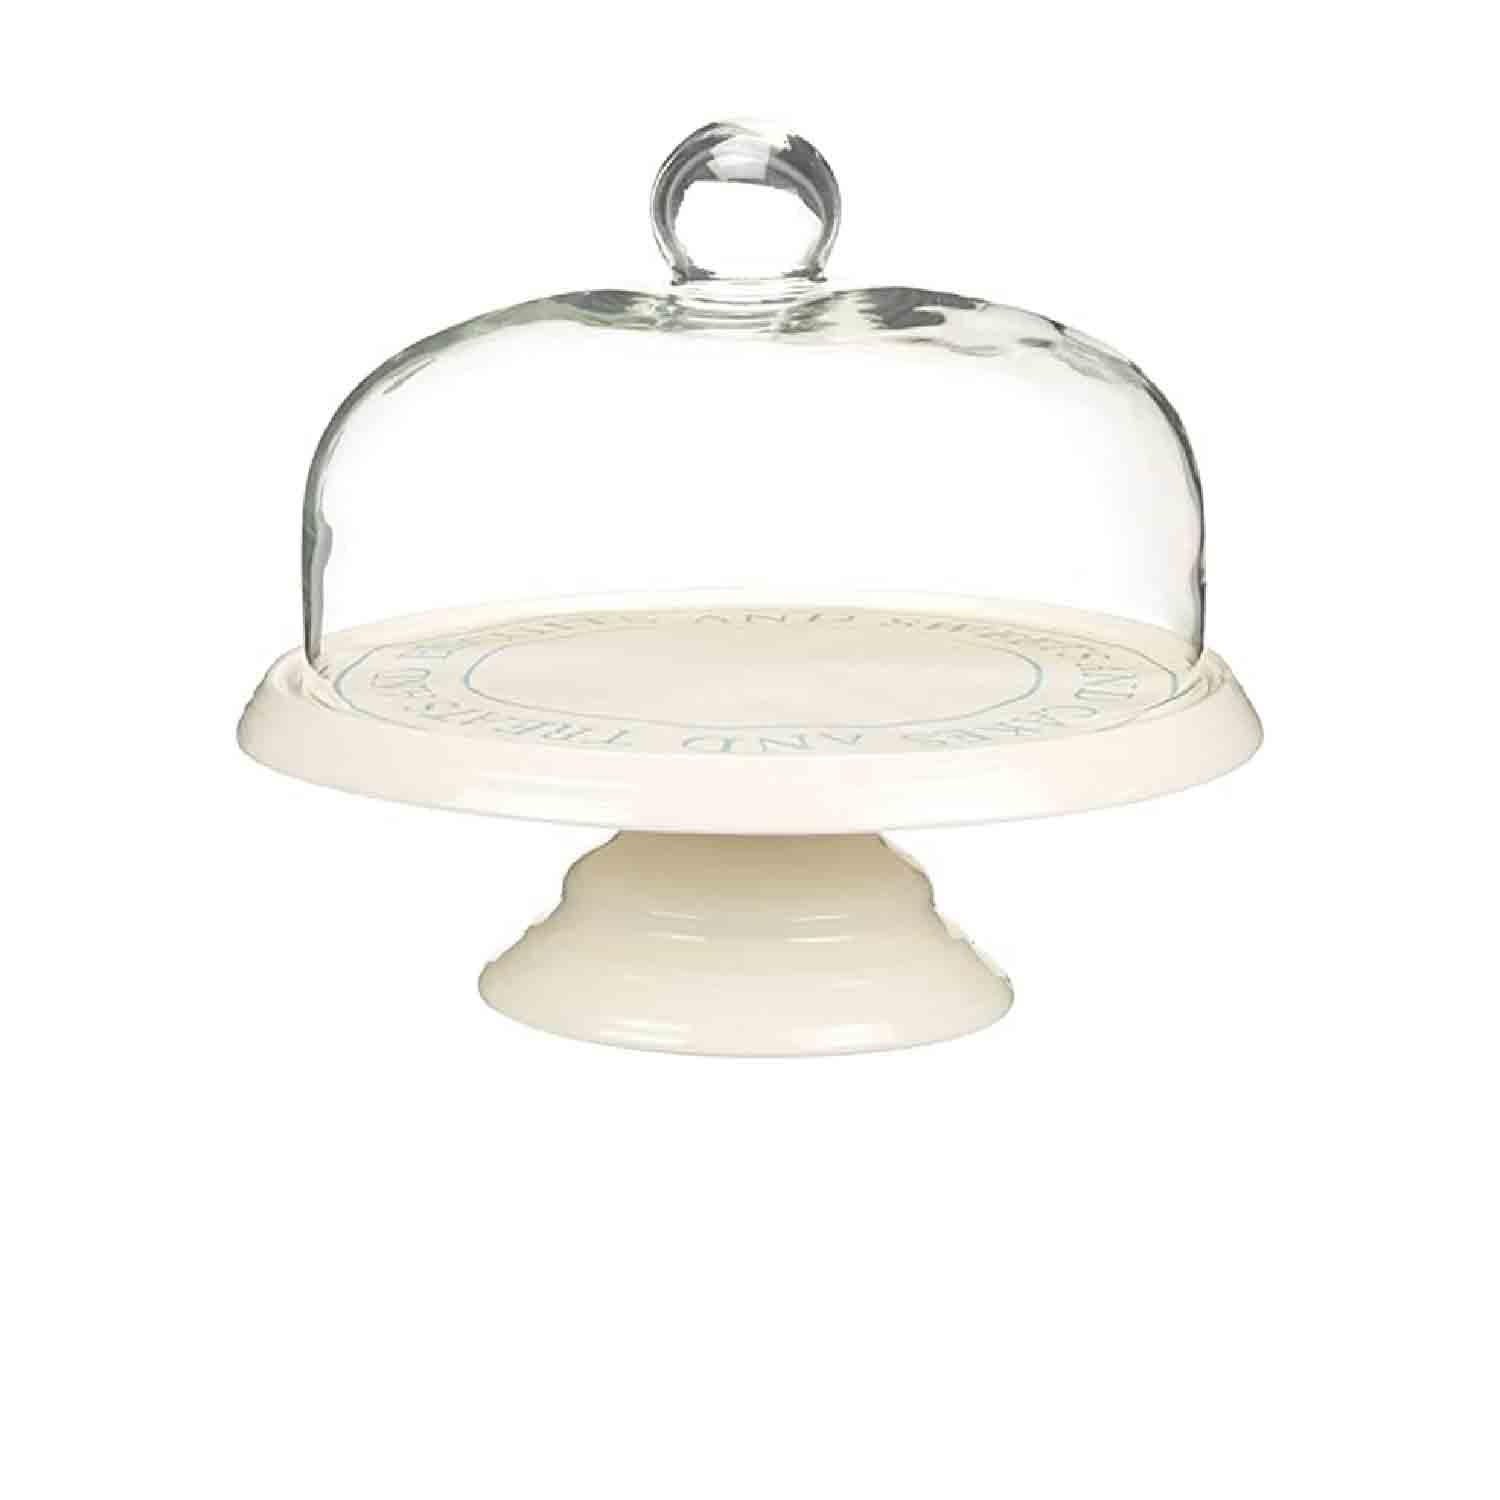 CLASSIC COLLECTION 29CM CERAMIC CAKE STAND WITH GLASS DOME